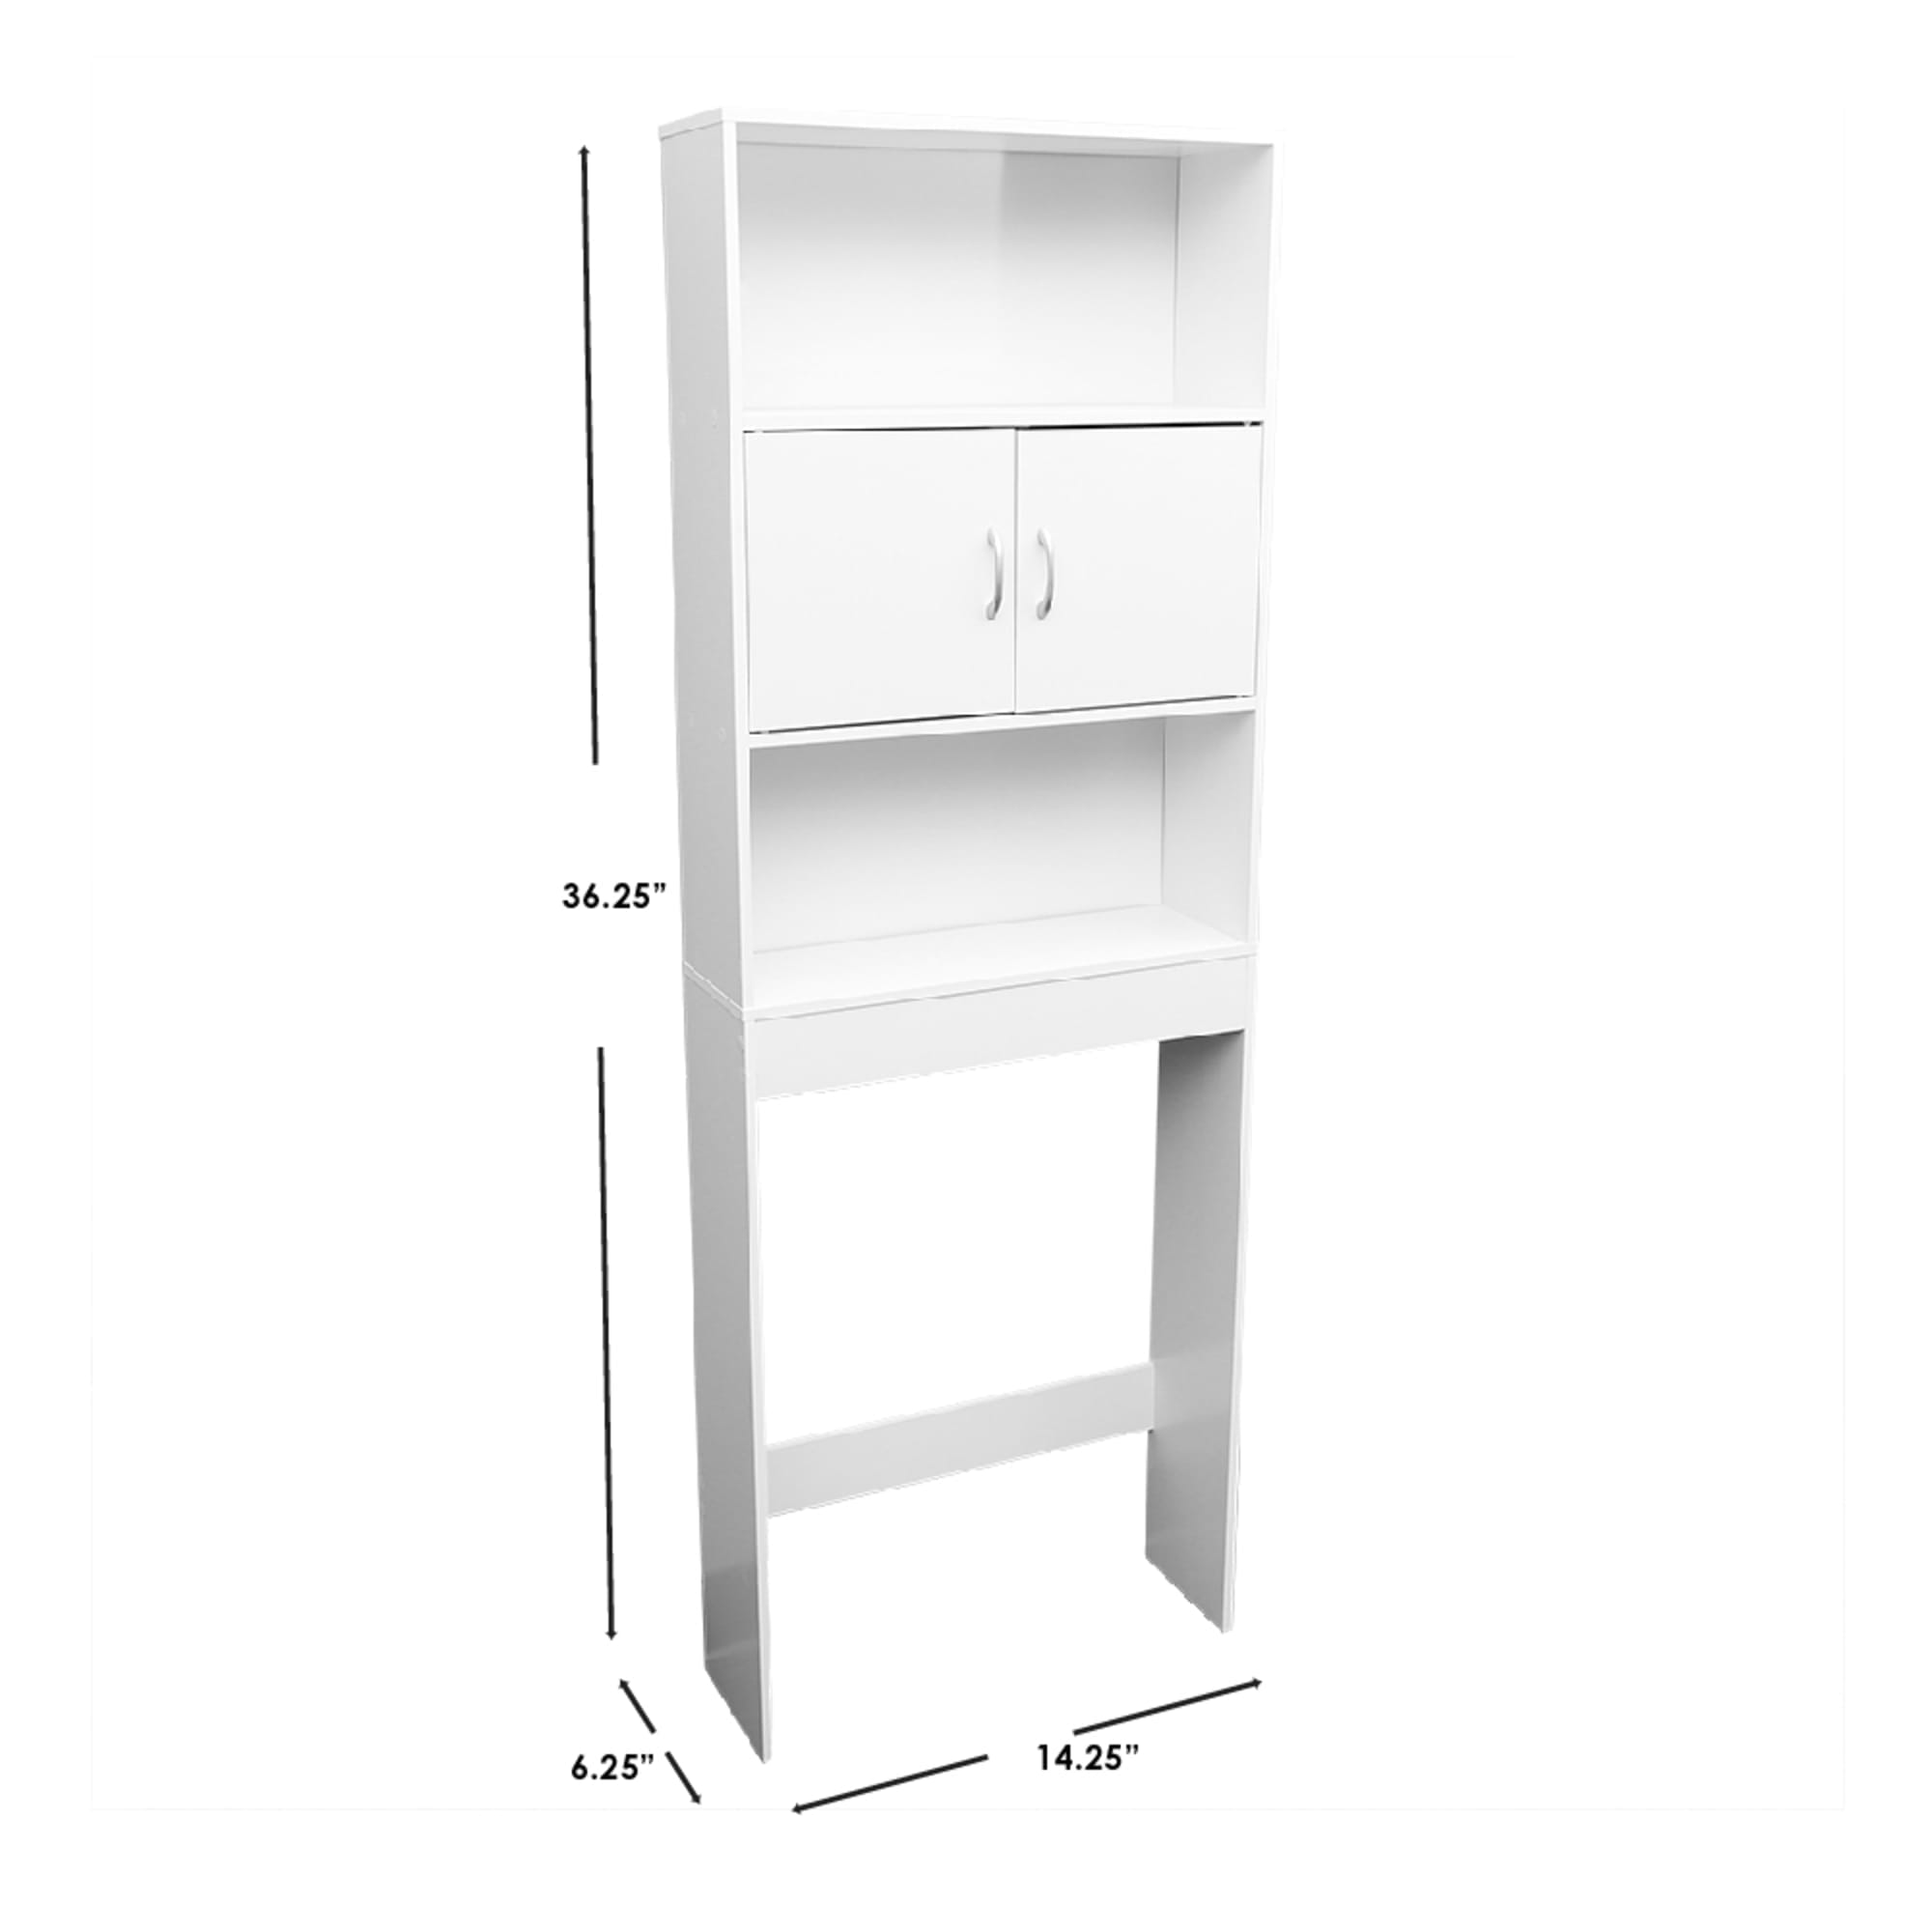 Home Basics 3 Tier MDF Over The Toilet Bathroom Shelf With Open Shelving and Cabinets, White $60.00 EACH, CASE PACK OF 1